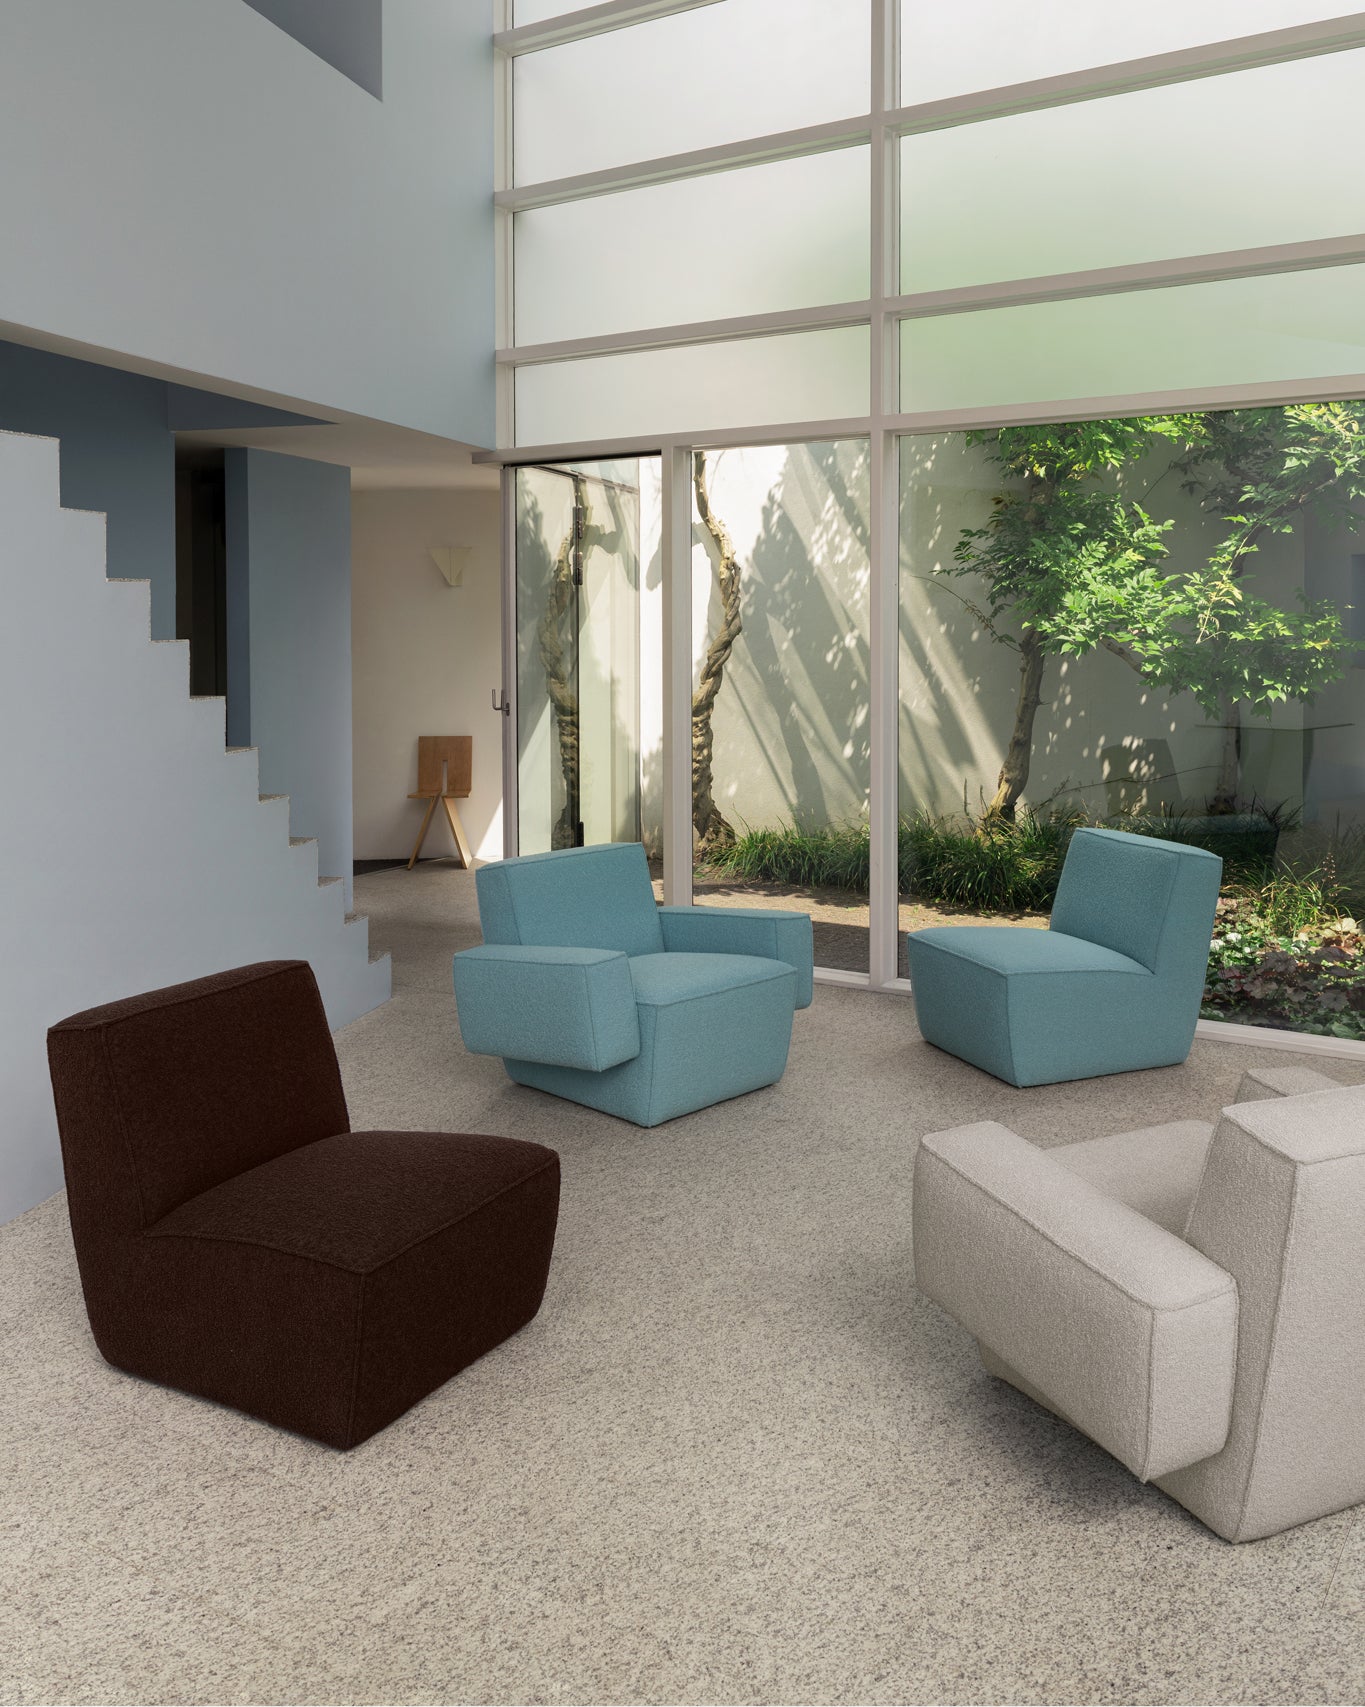 A lifestyle image of a lounge scene featuring Hunk Lounge Chair and Hunk Lounge Chair with Armrests in the shades Icicle, Chocolate Brown, and Swan.